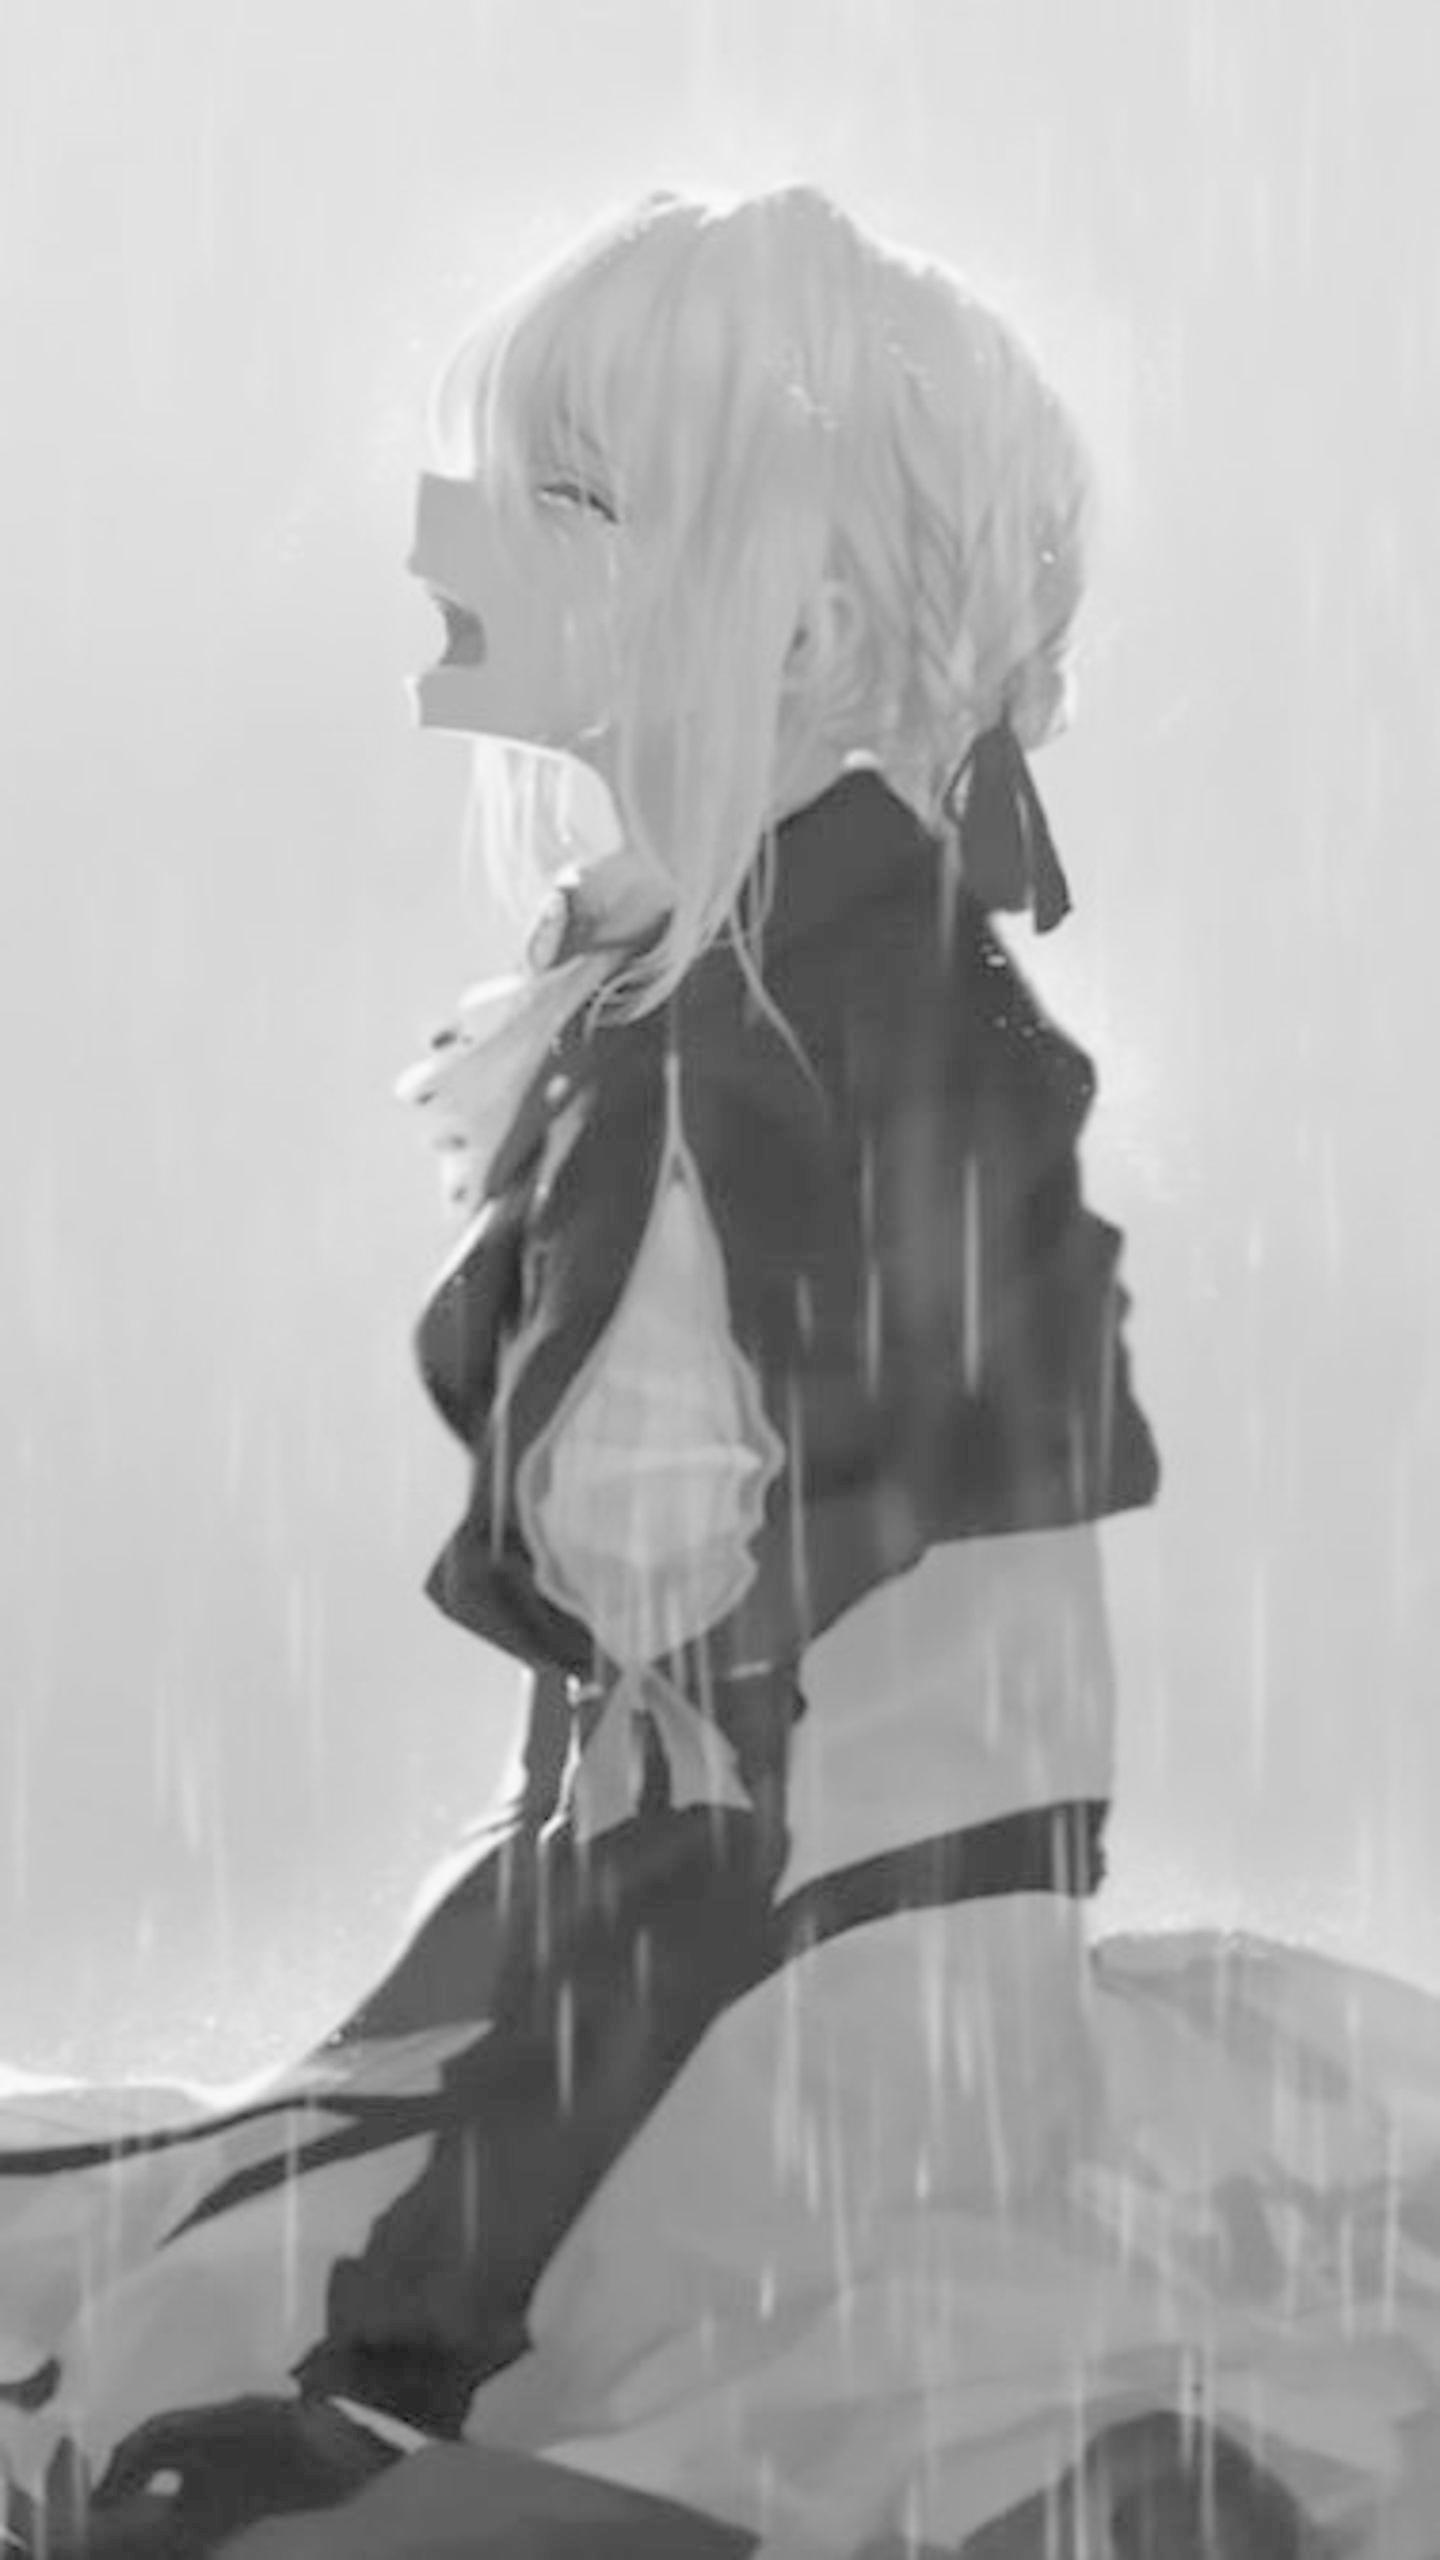 Sad Anime Wallpapers for Android - APK Download